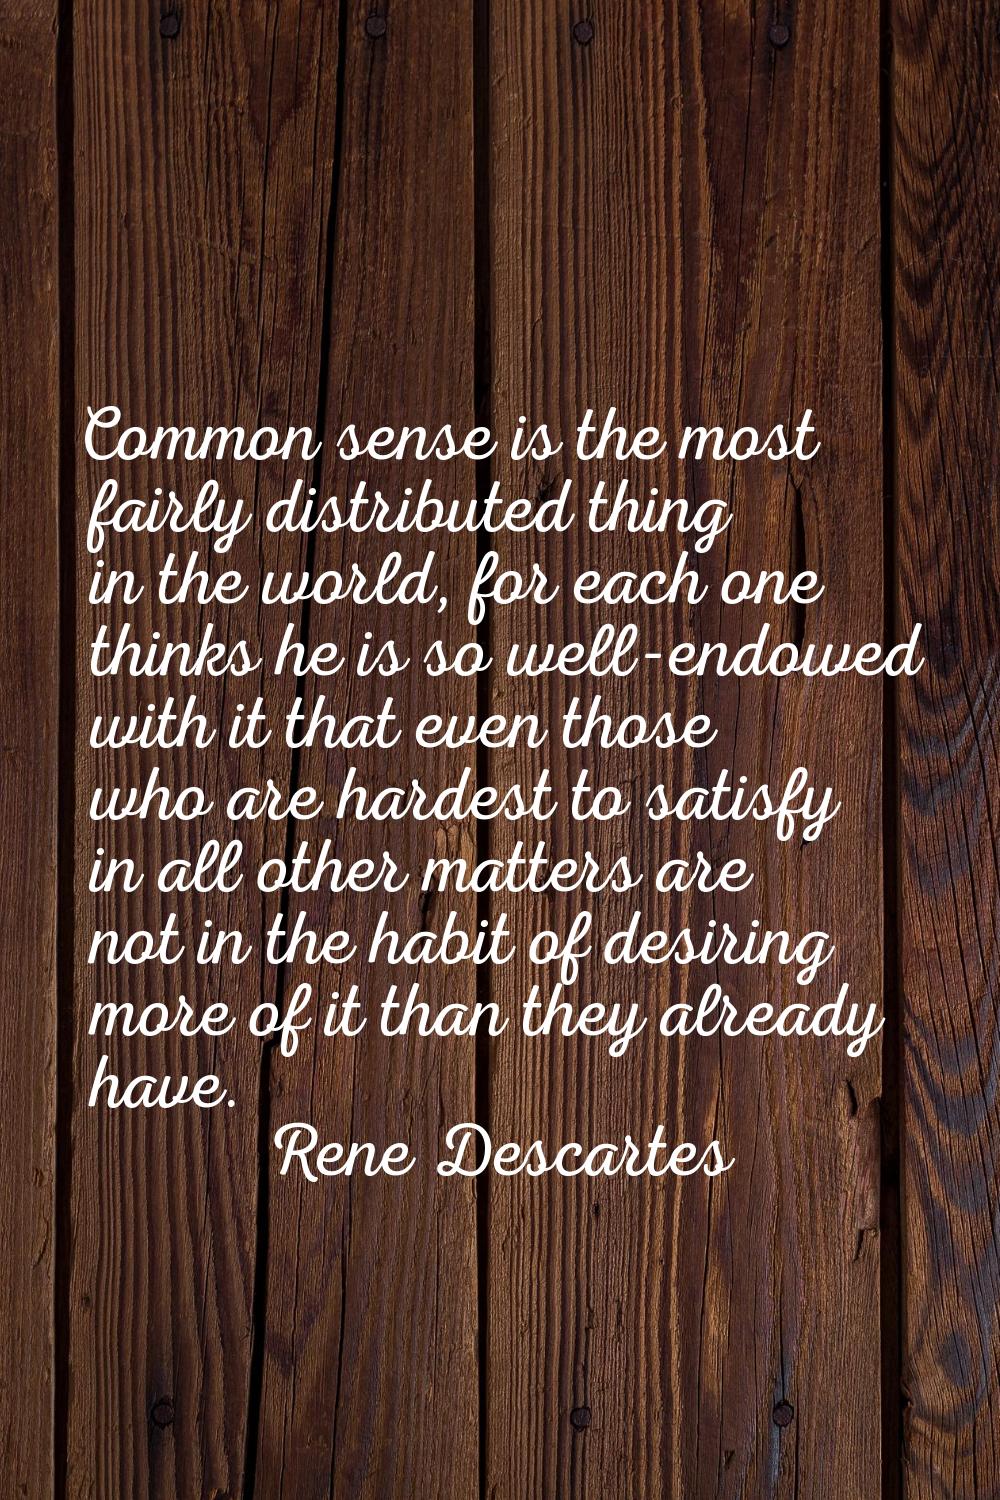 Common sense is the most fairly distributed thing in the world, for each one thinks he is so well-e